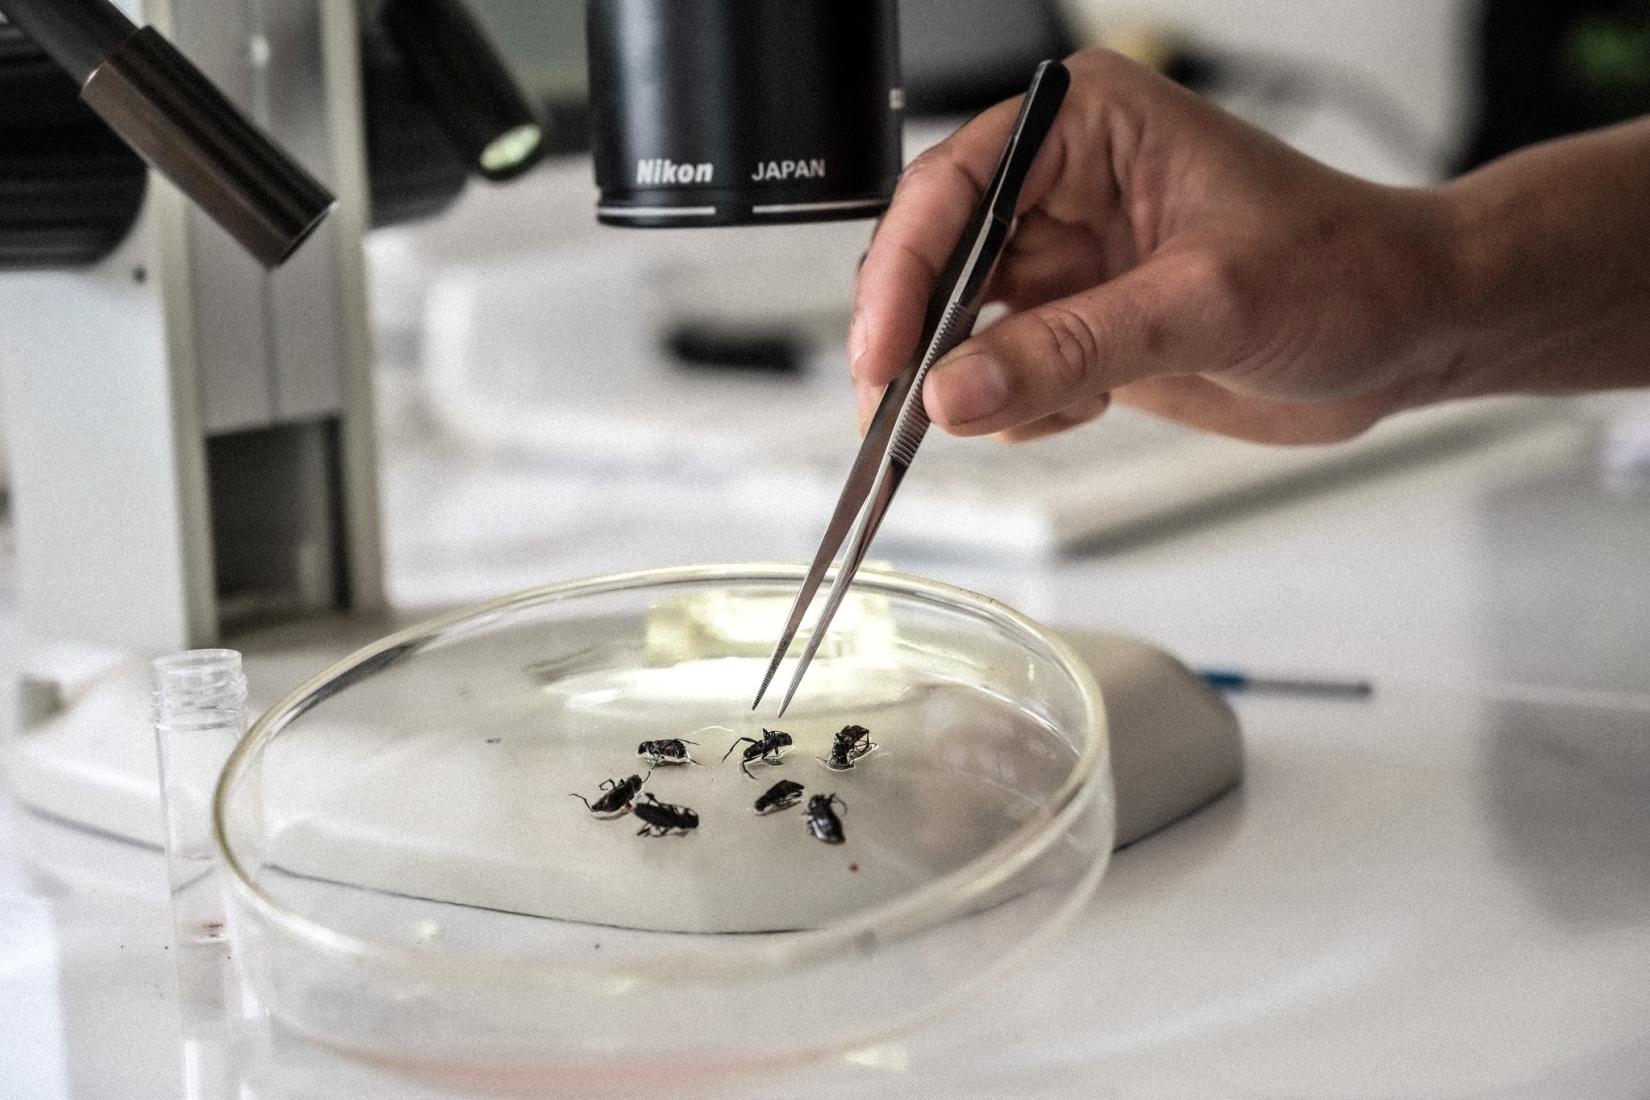 The ACIAR-funded laboratory is providing Laotian researchers with the resources they need to identify harmful pests.